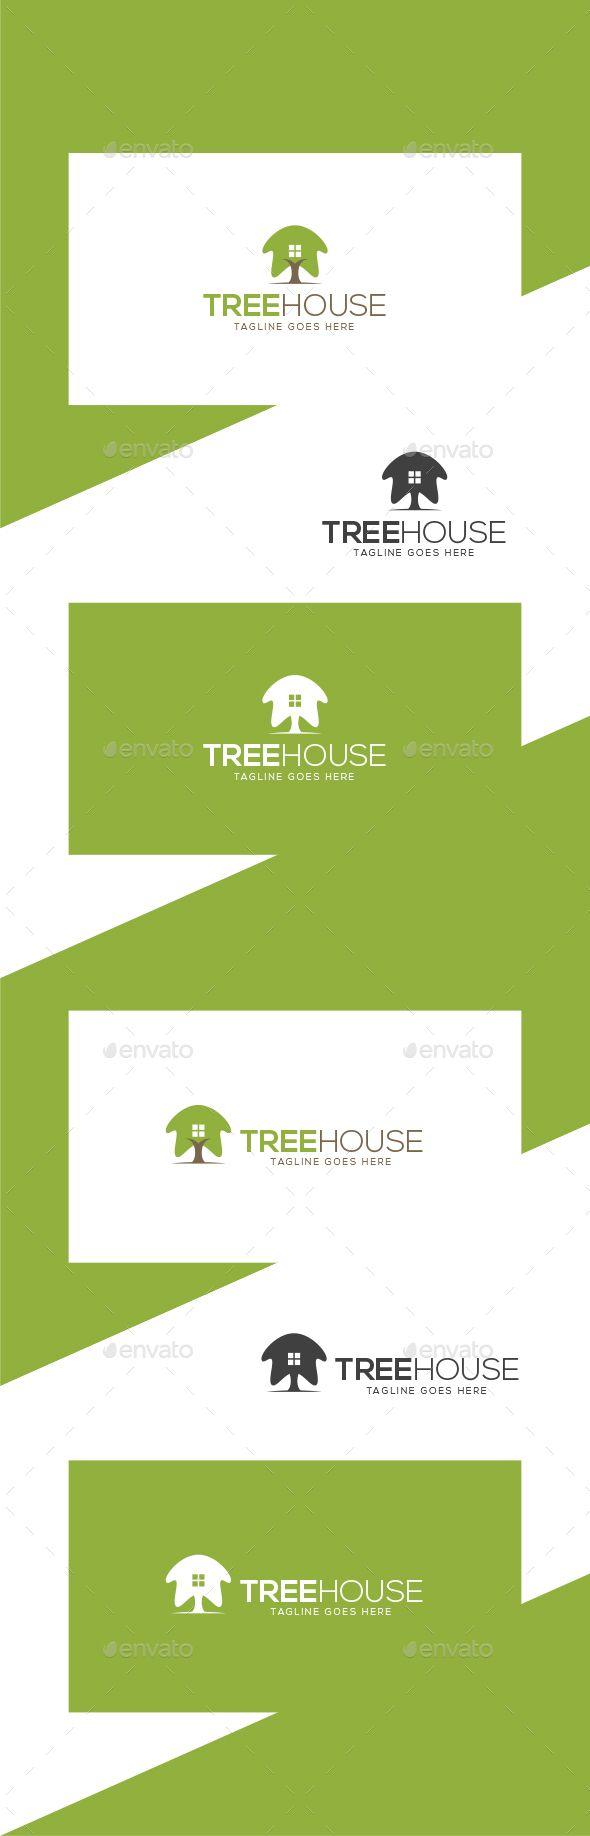 It5 Logo - If you love TreeHouse Logo Template, please don¡¯t forget to rate it